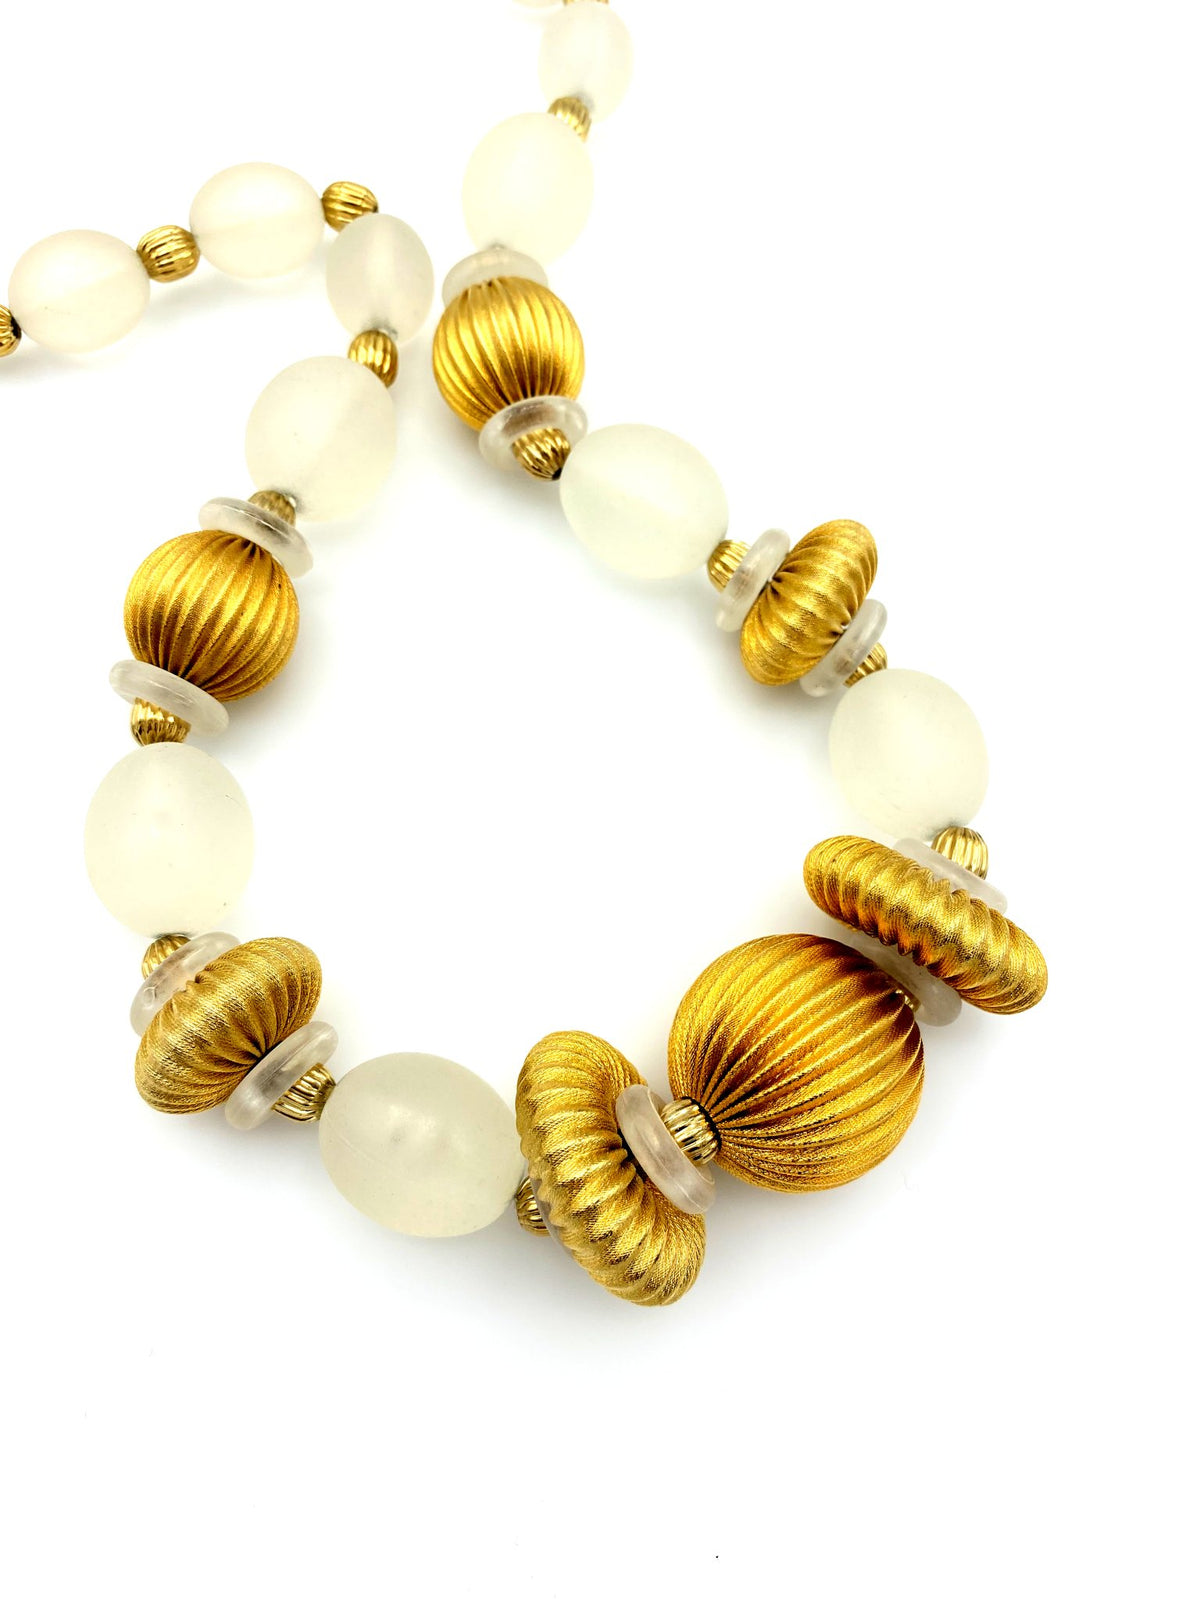 Pierre Cardin Satin Lucite Gold Beaded Statement Necklace - 24 Wishes Vintage Jewelry